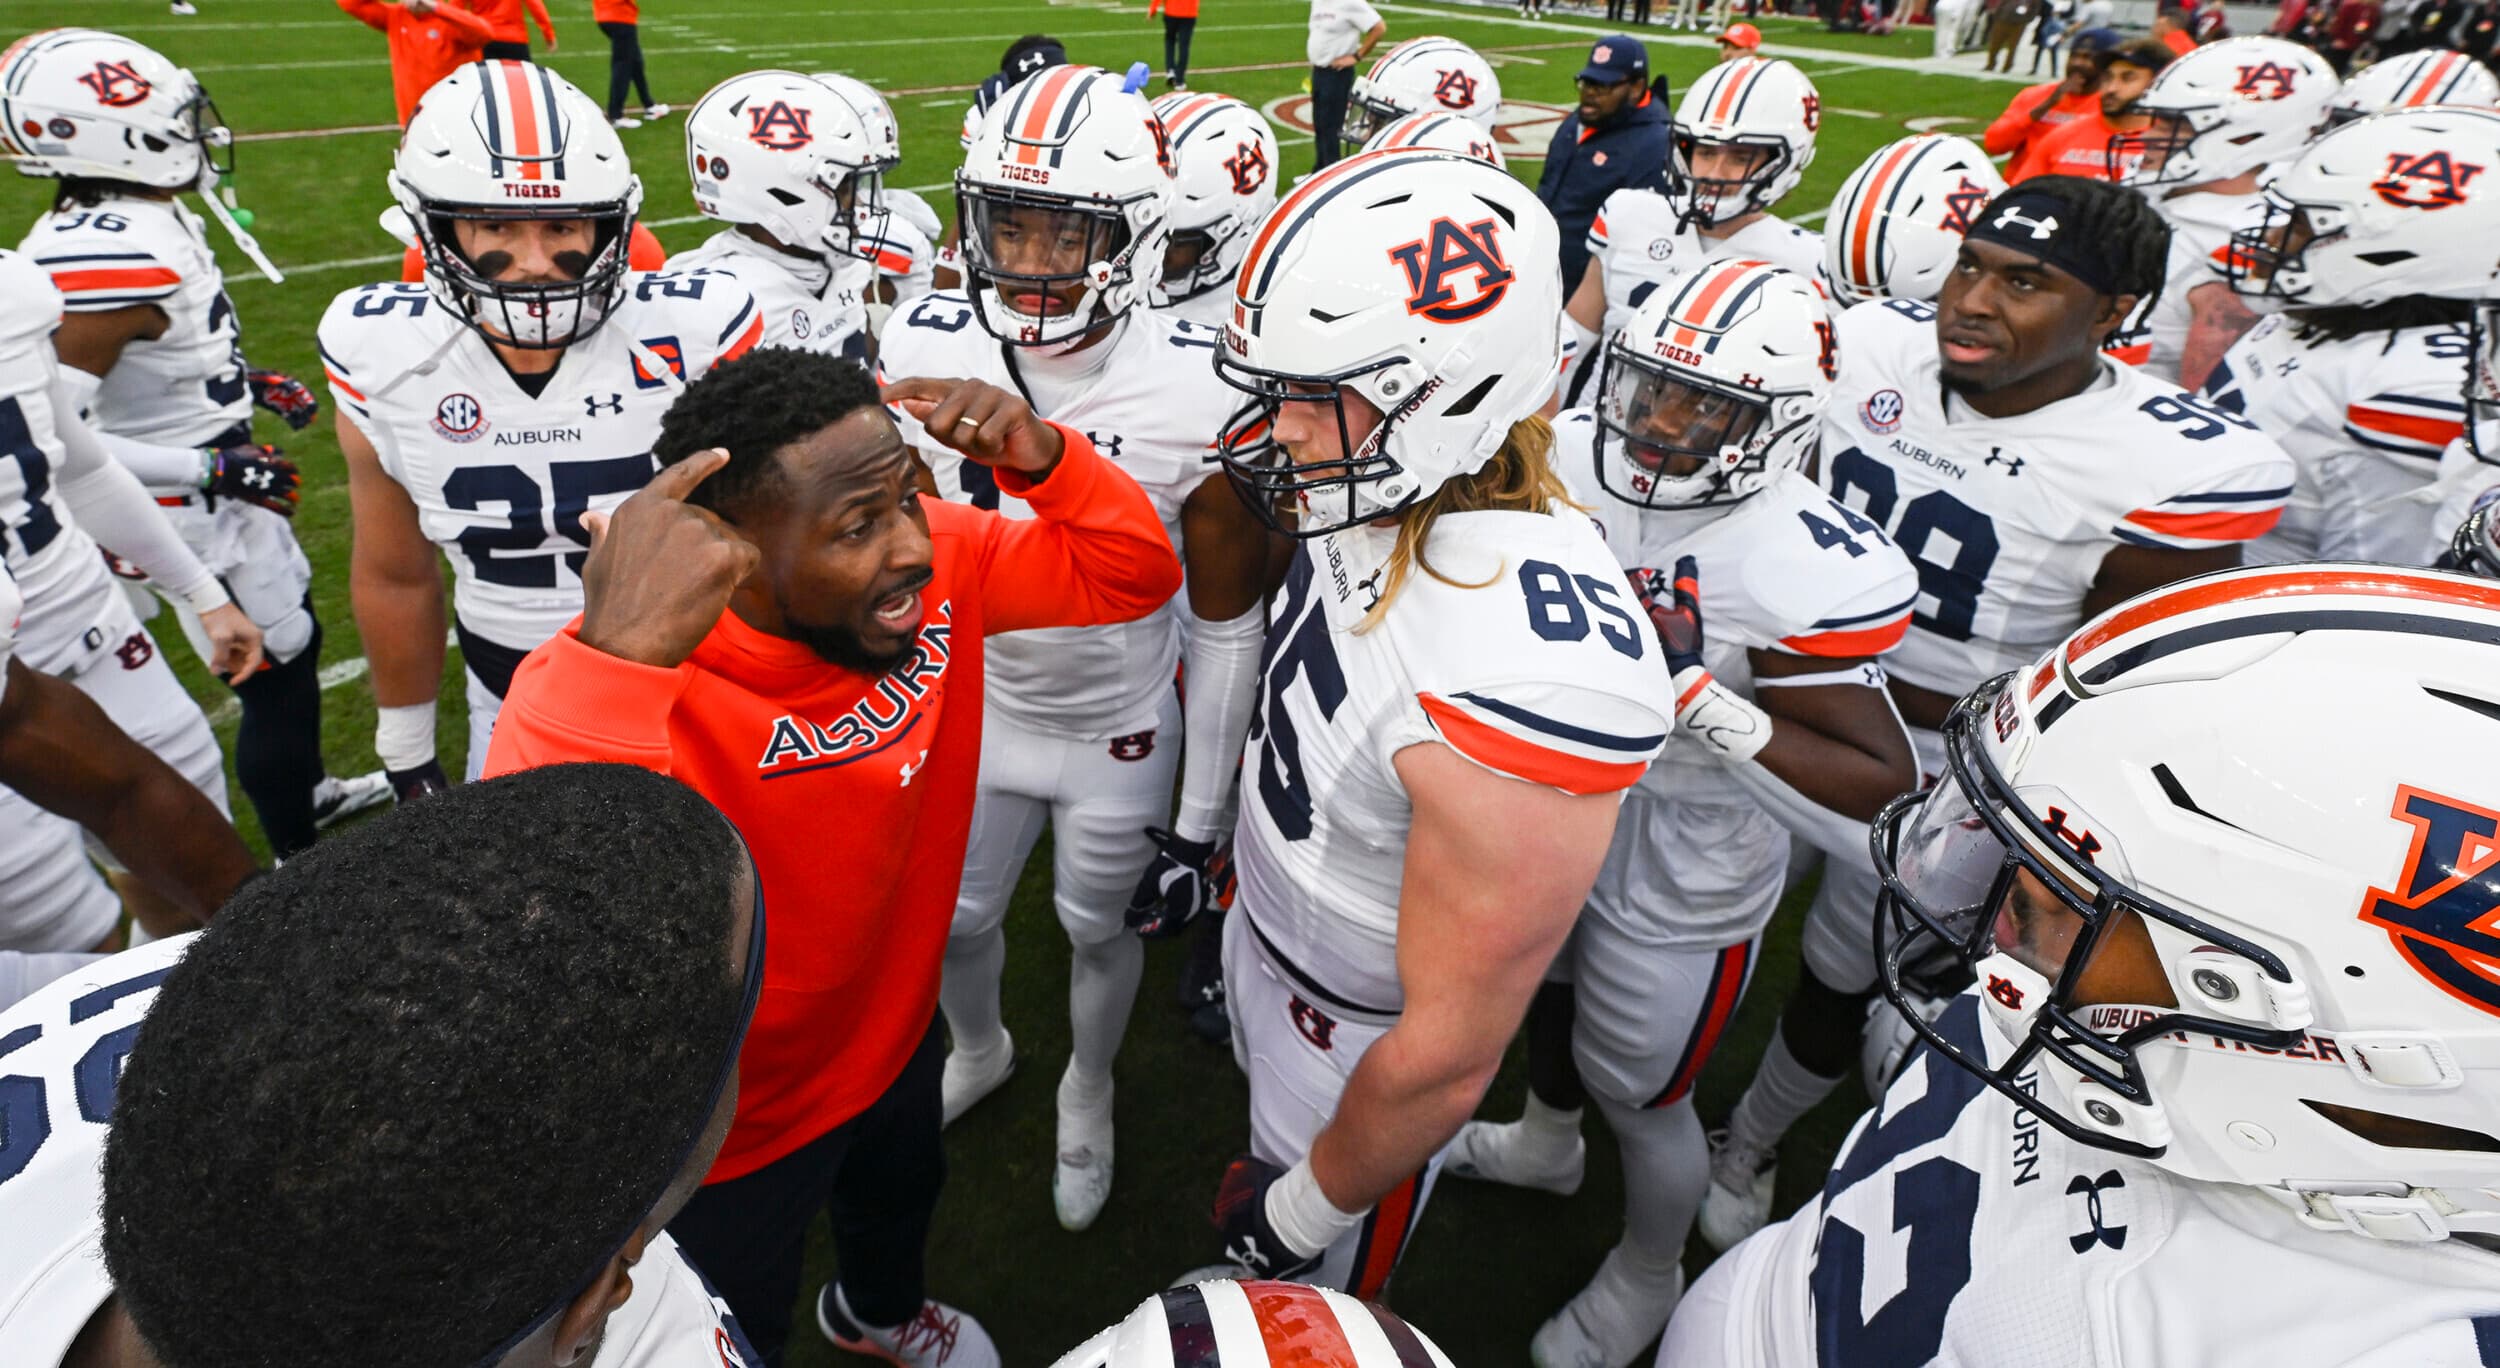 Nov 26, 2022; Tuscaloosa, Al, USA; Coach Carnell Williams talks to his team before the game between Auburn and Alabama at Bryant-Denny Stadium.